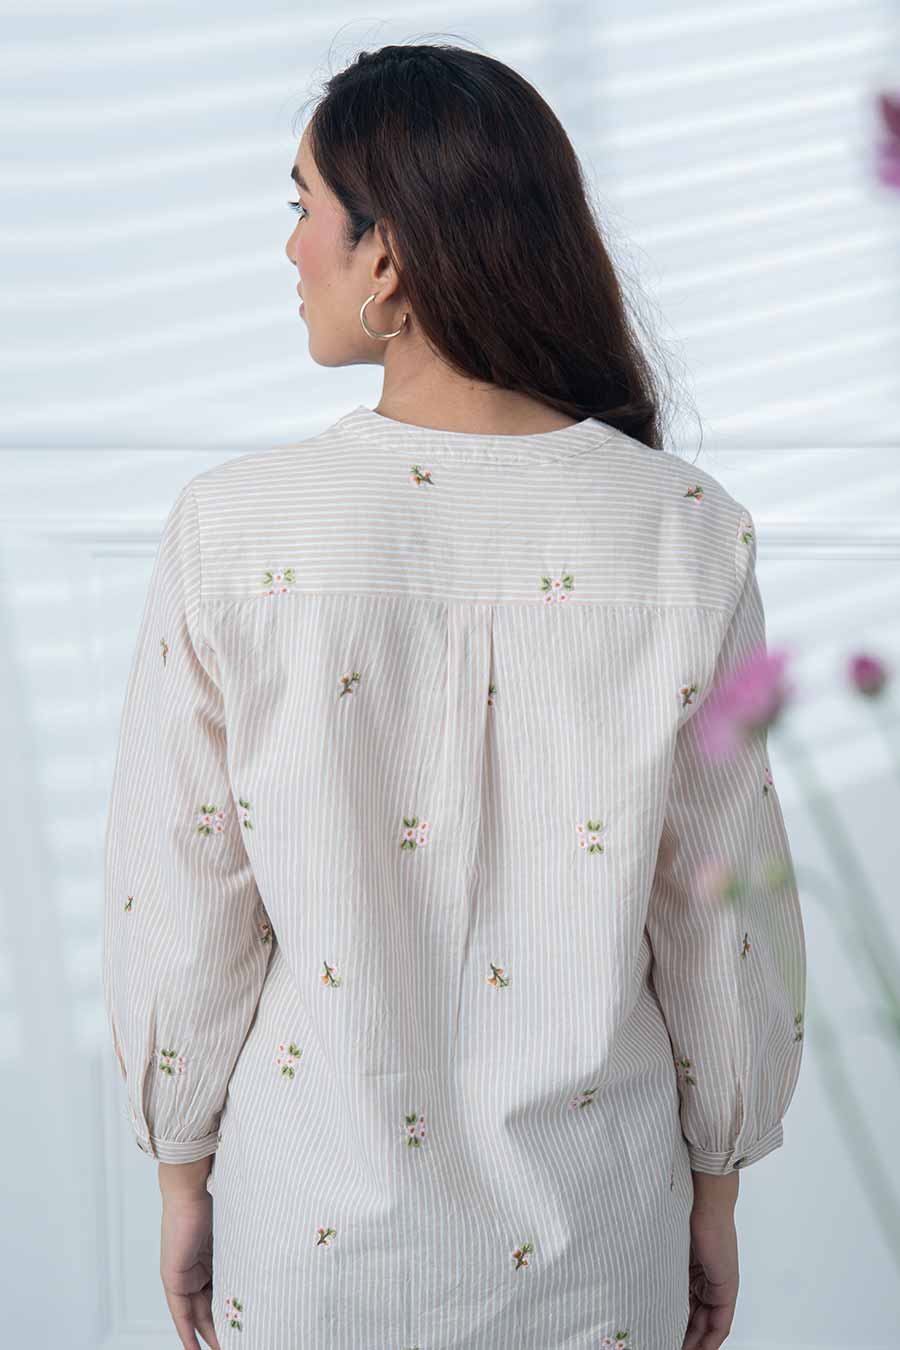 Beige Floral Motif Embroidered Striped Top